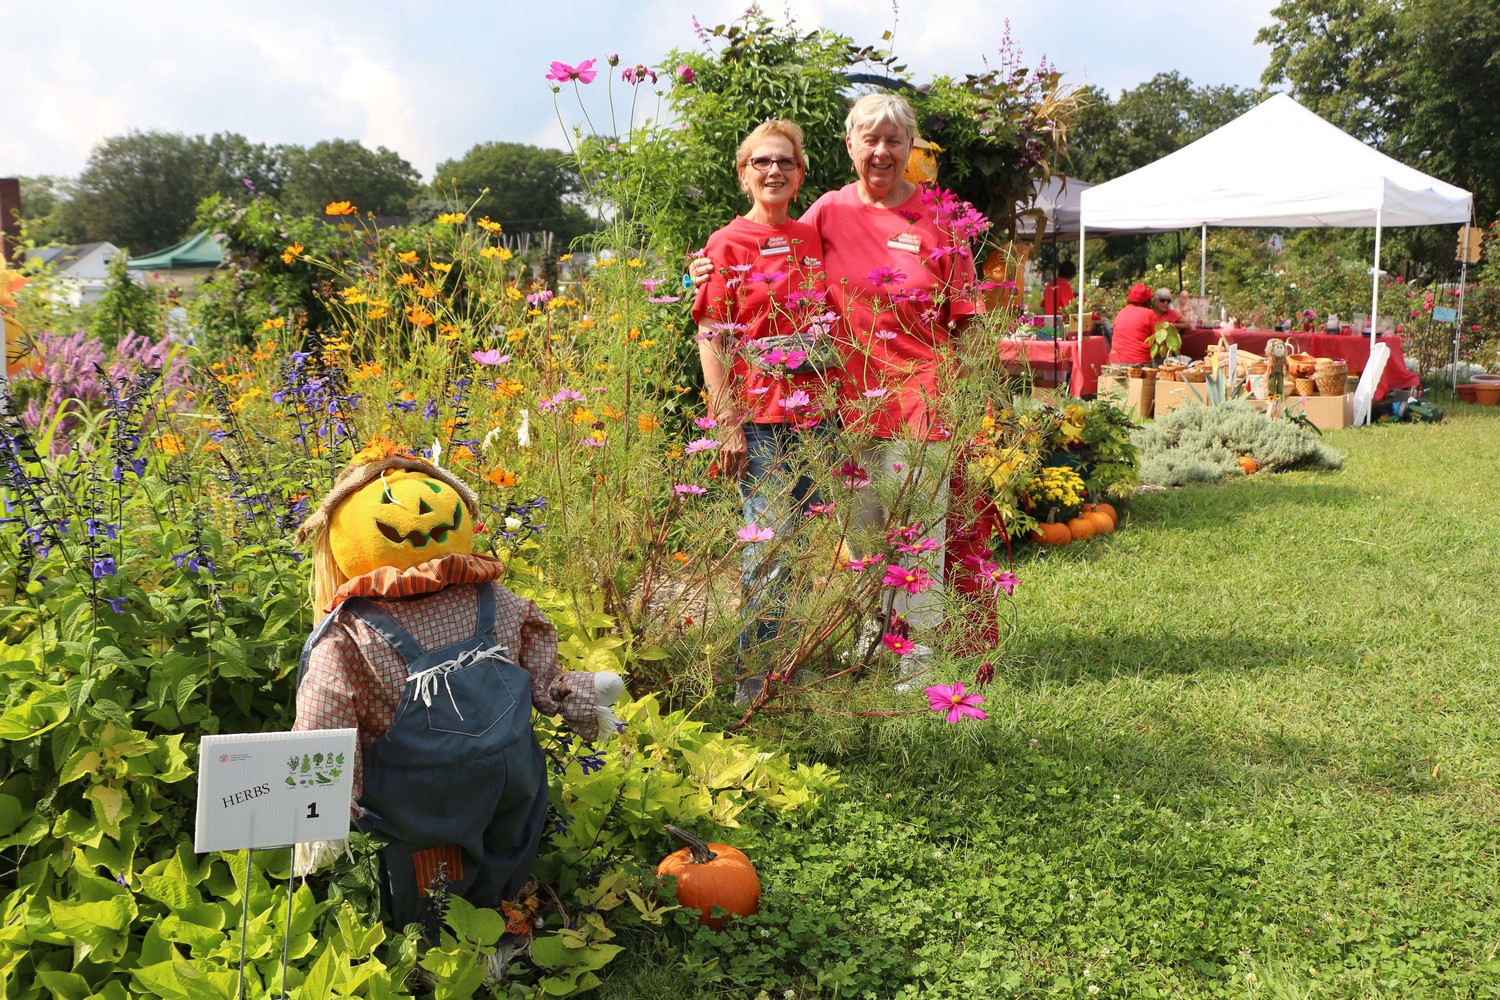 East Meadow Farm Master Gardeners Veronica Caiazza and Nonie Muellers joined community members for the farm’s annual Family Fun Day on Sept. 16.